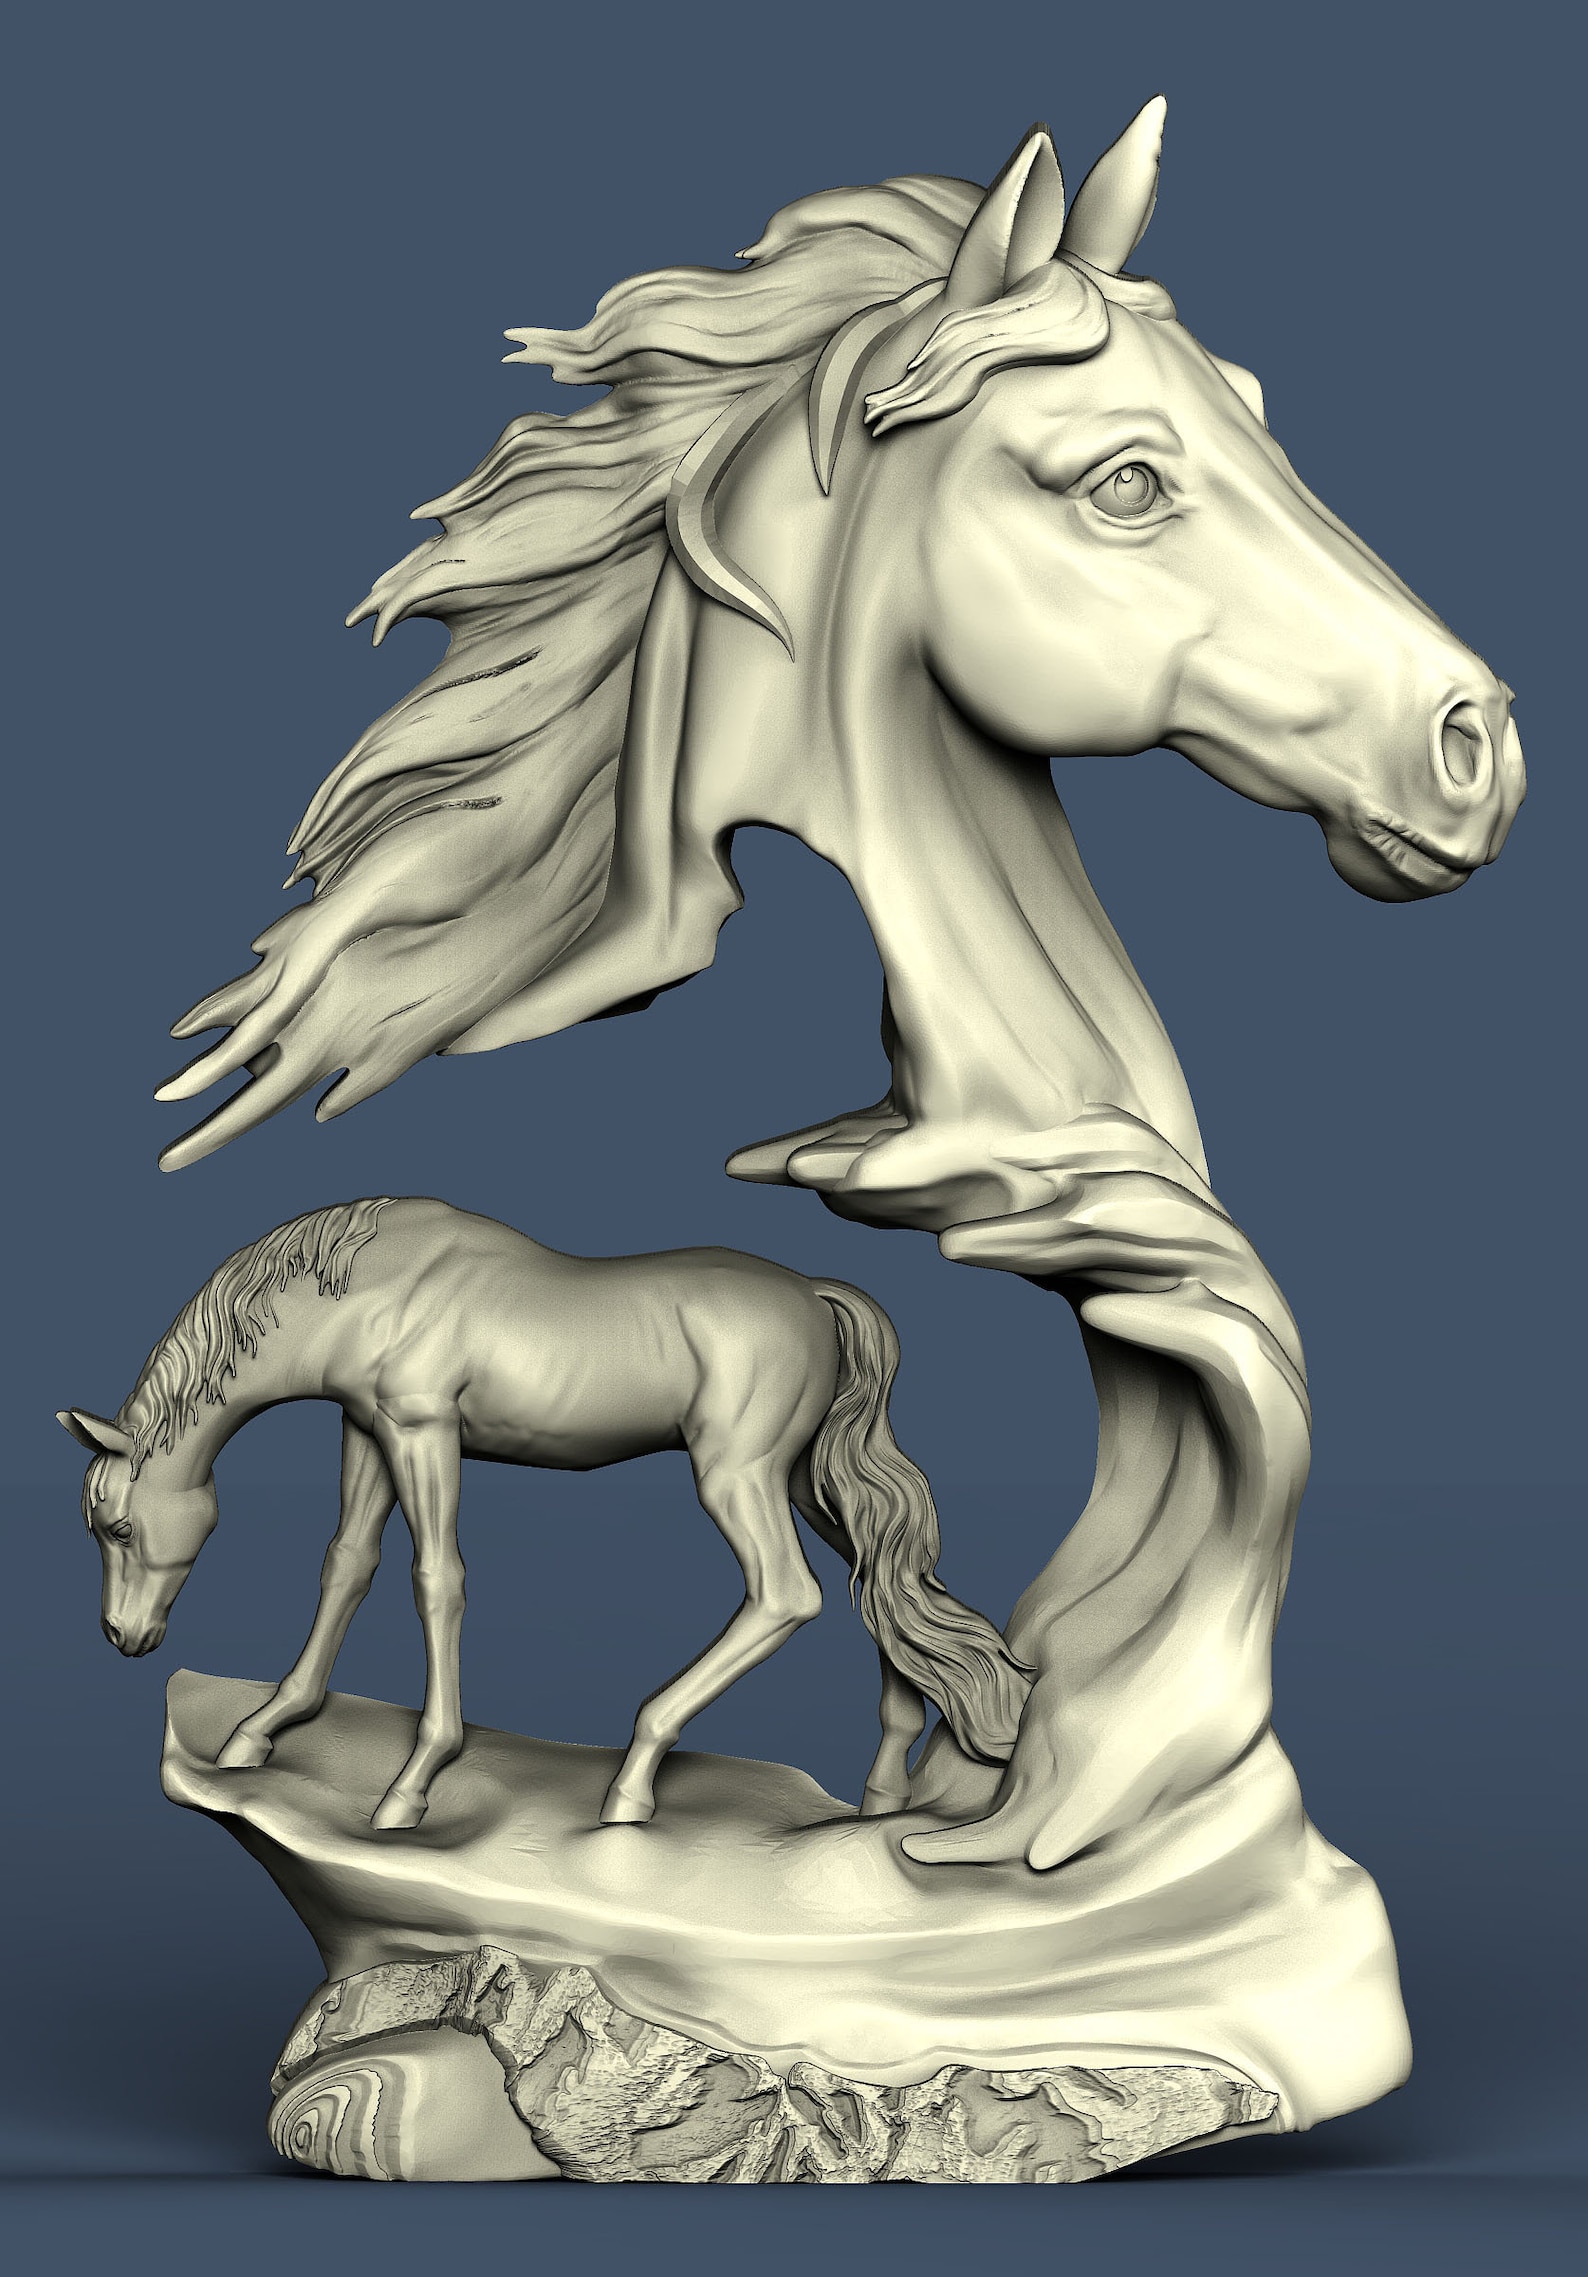 Two Horses Animal 3d Stl Model Cnc Router Engraver Carving Etsy